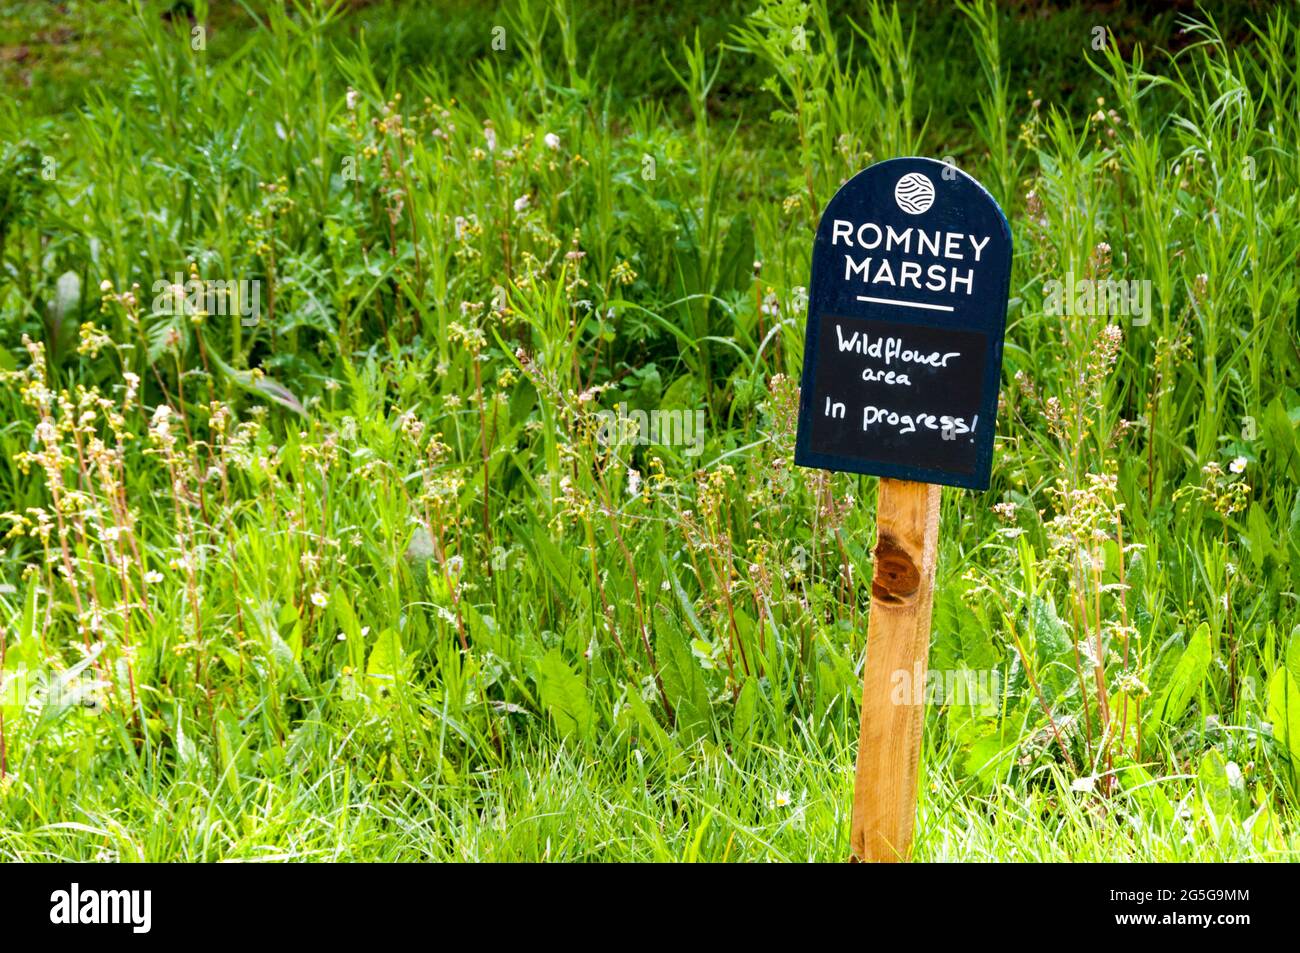 Wildflower area in progress sign in the churchyard of St George's church, Ivychurch on Romney Marsh. Stock Photo